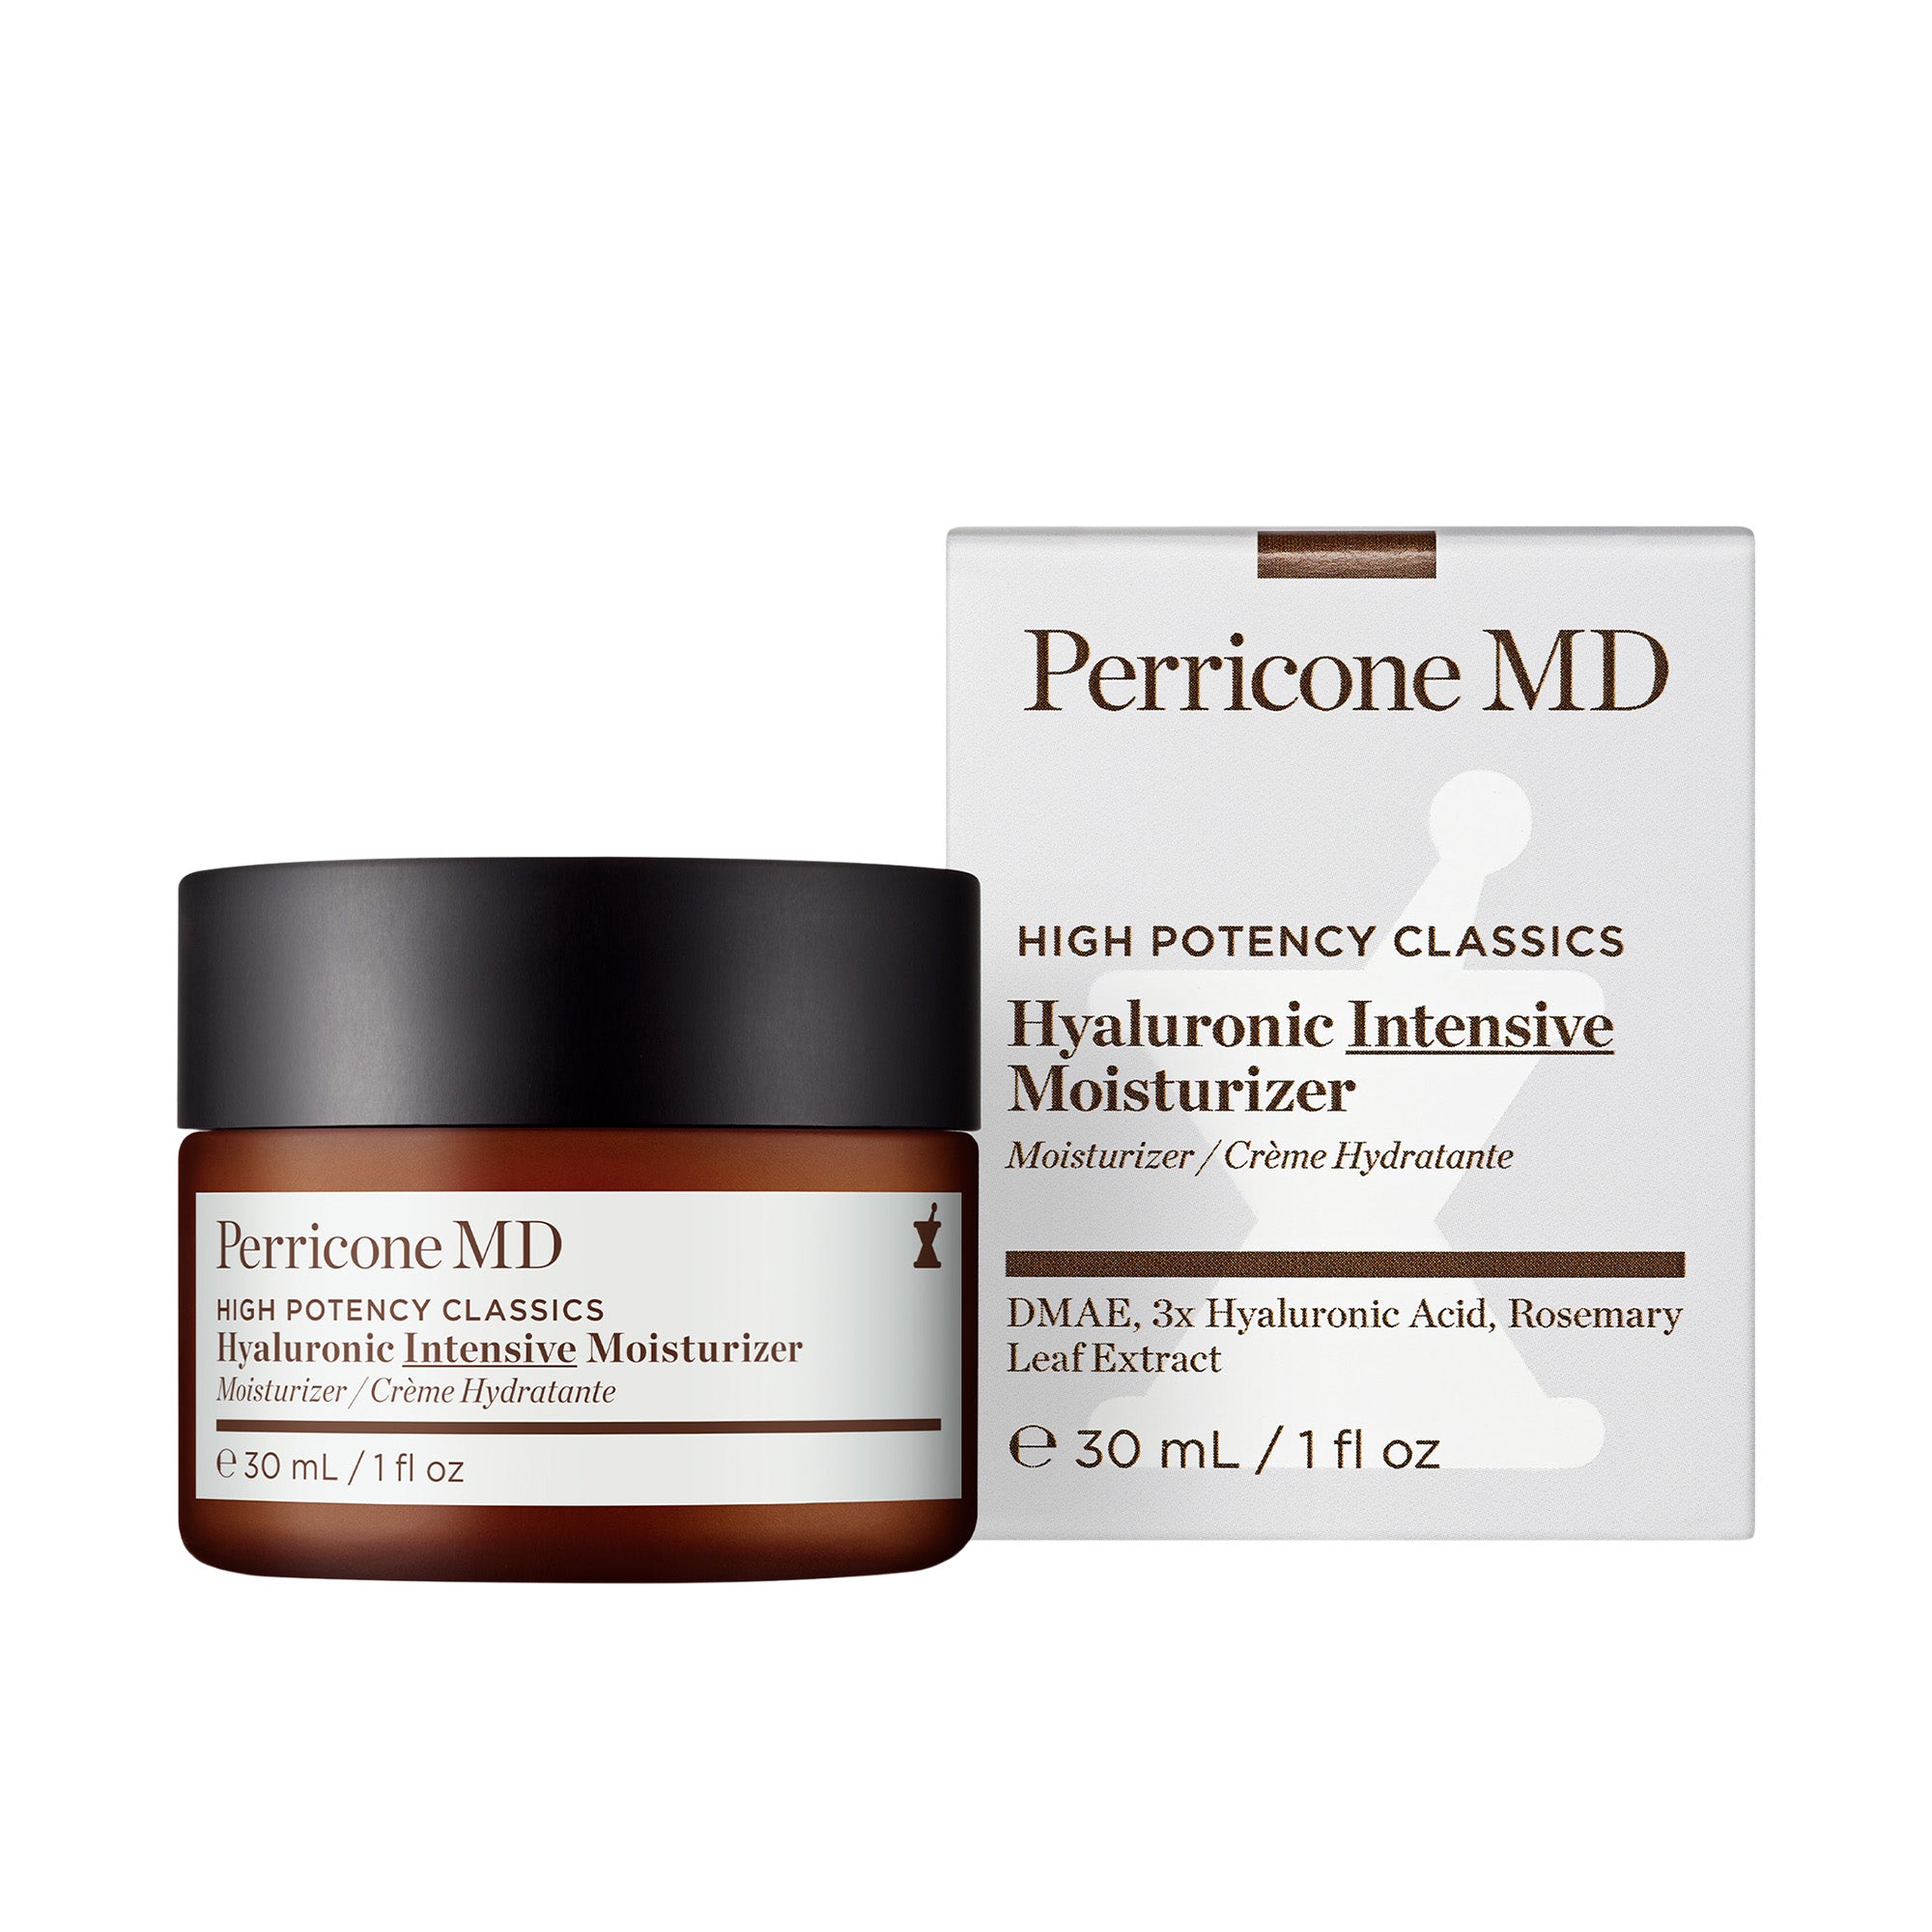 Perricone MD High Potency Classics Hyaluronic Intensive Moisturizer / 1OZ